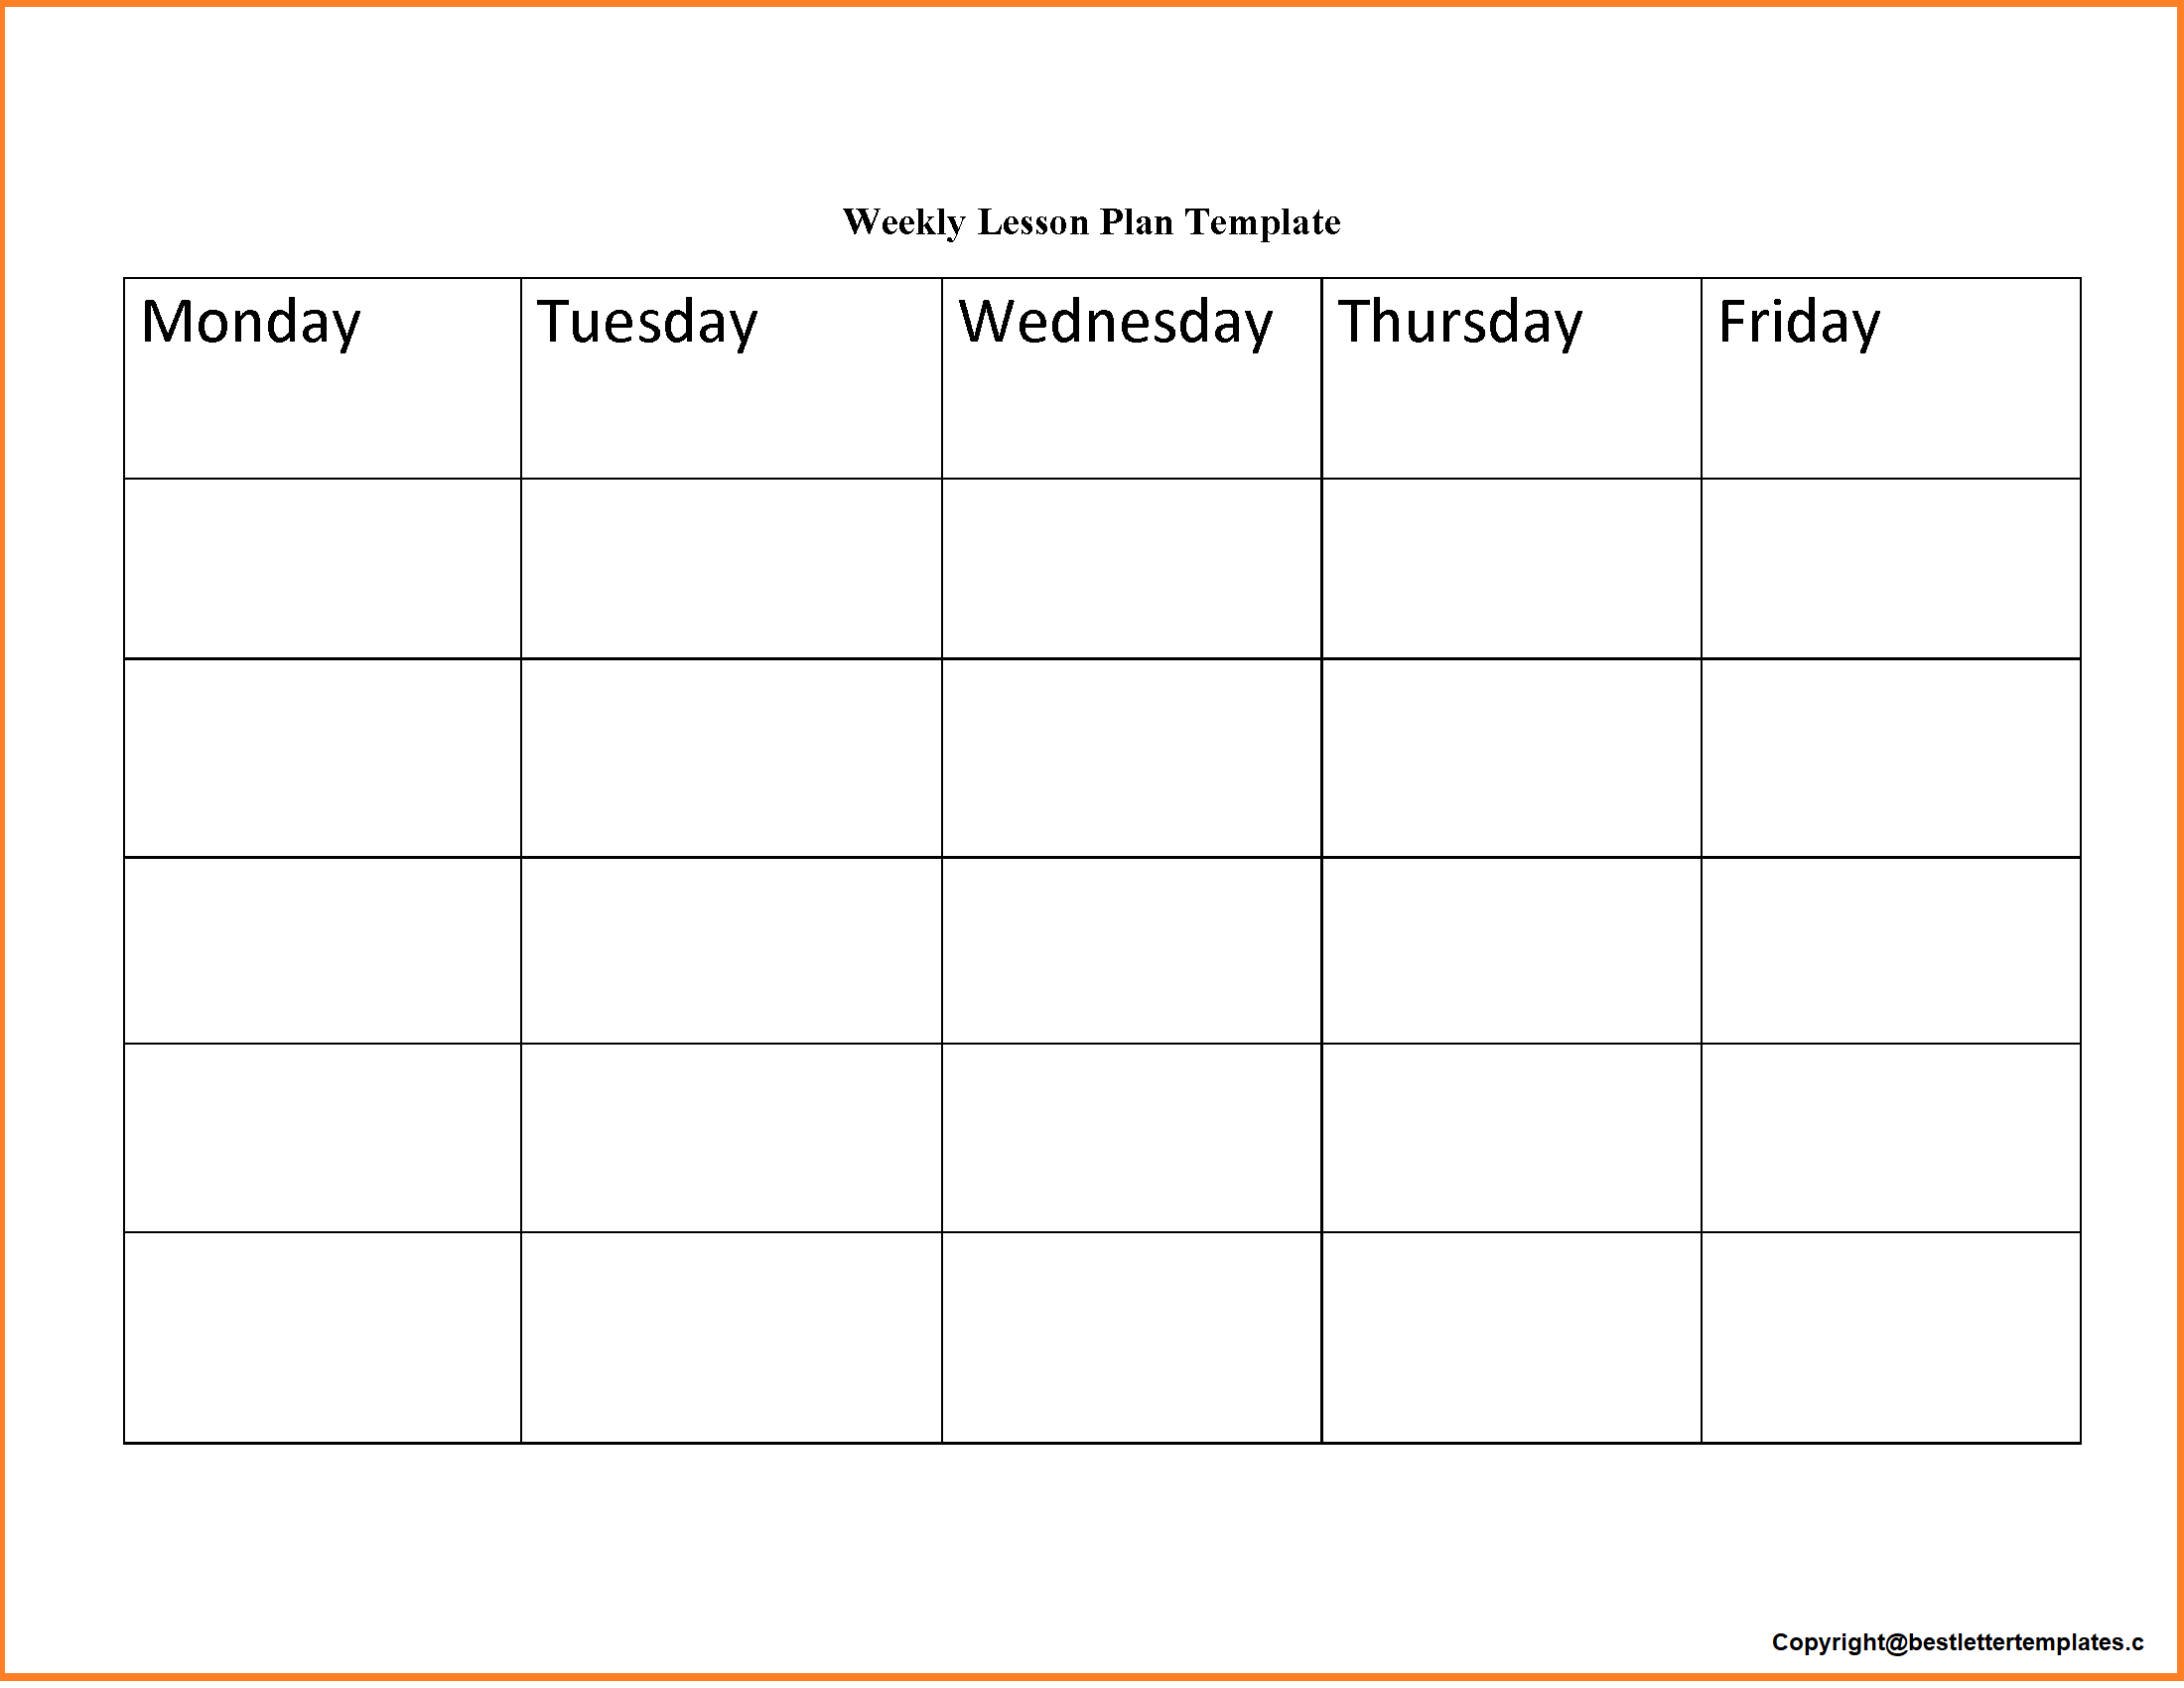 Weekly Lesson Plan Template | Best Letter Templates